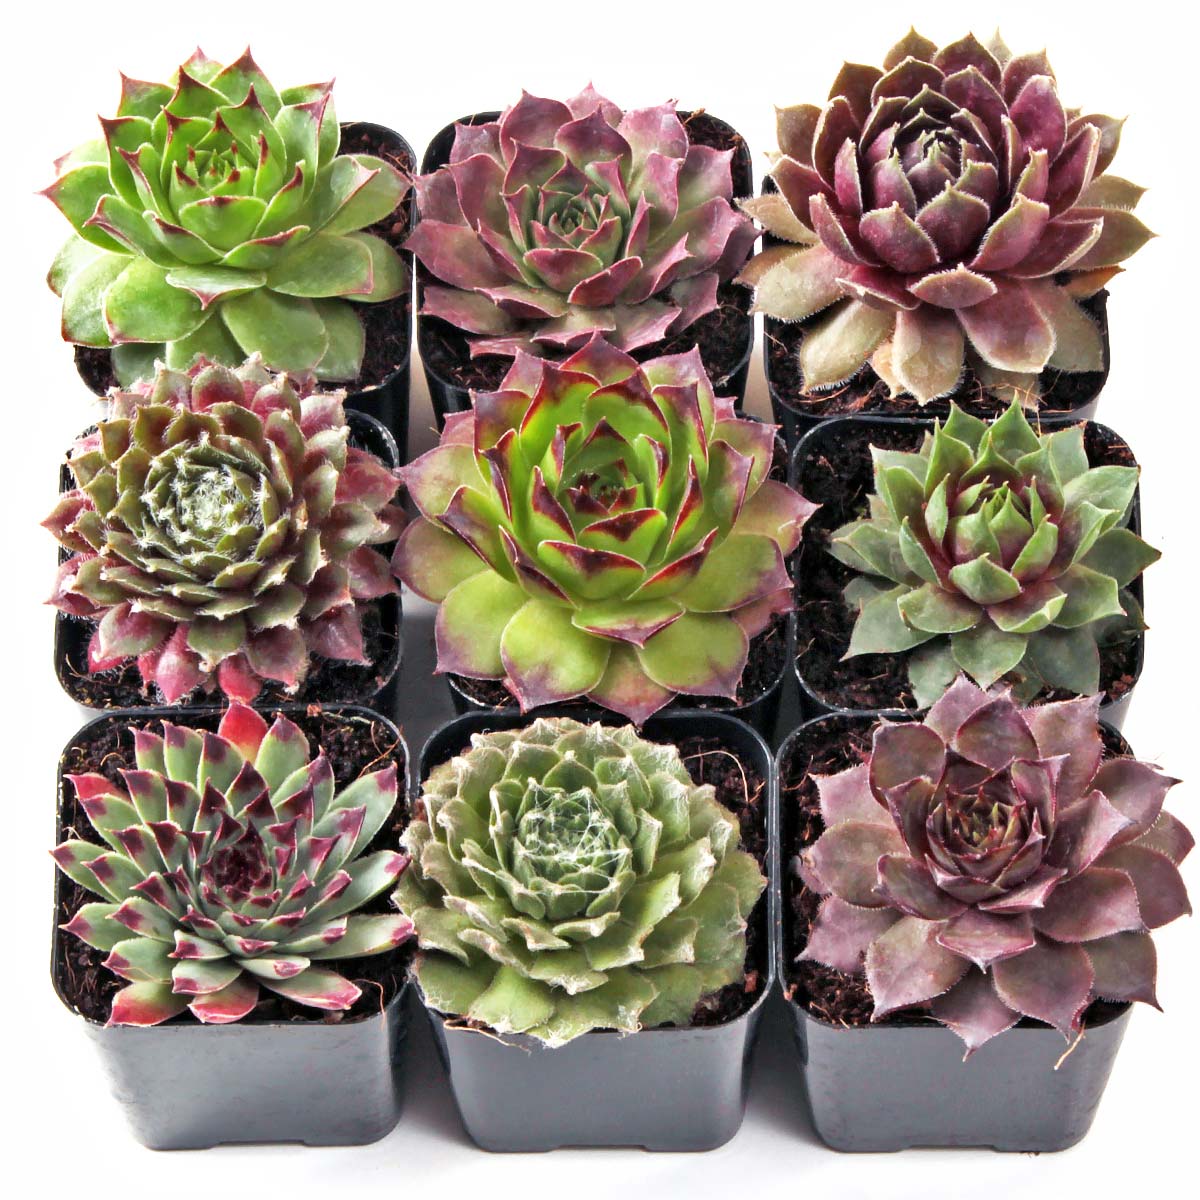 Can I order an assortment  of hardy sempervivium,  no sedum included, in larger numbers than 9?